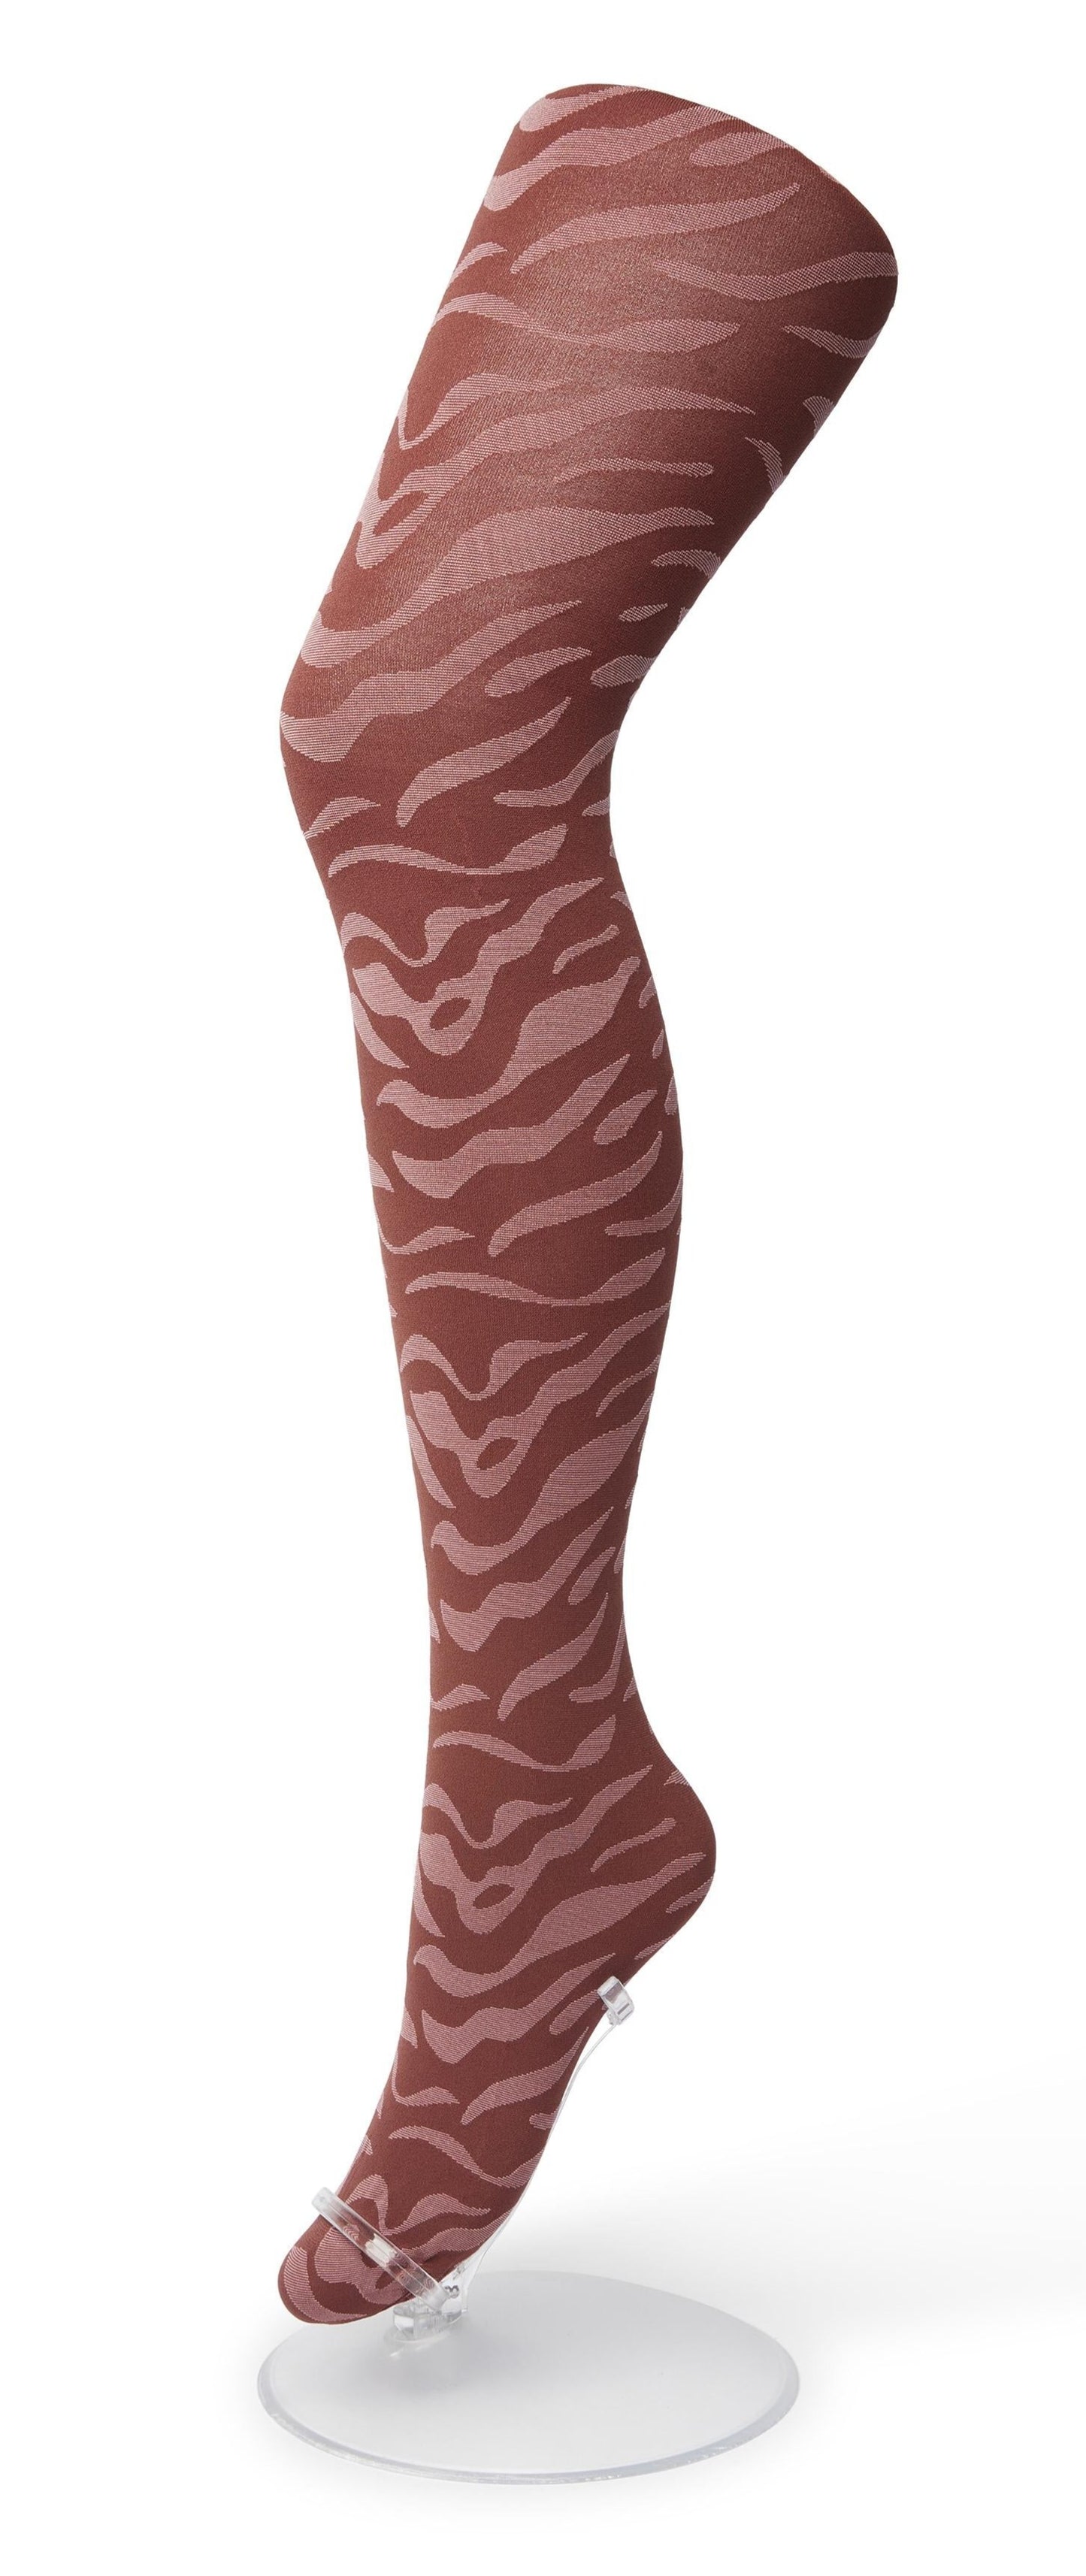 Bonnie Doon Zebra Tights - Ultra opaque wine fashion tights with a pale pink woven wavy style zebra pattern, flat seams and gusset.